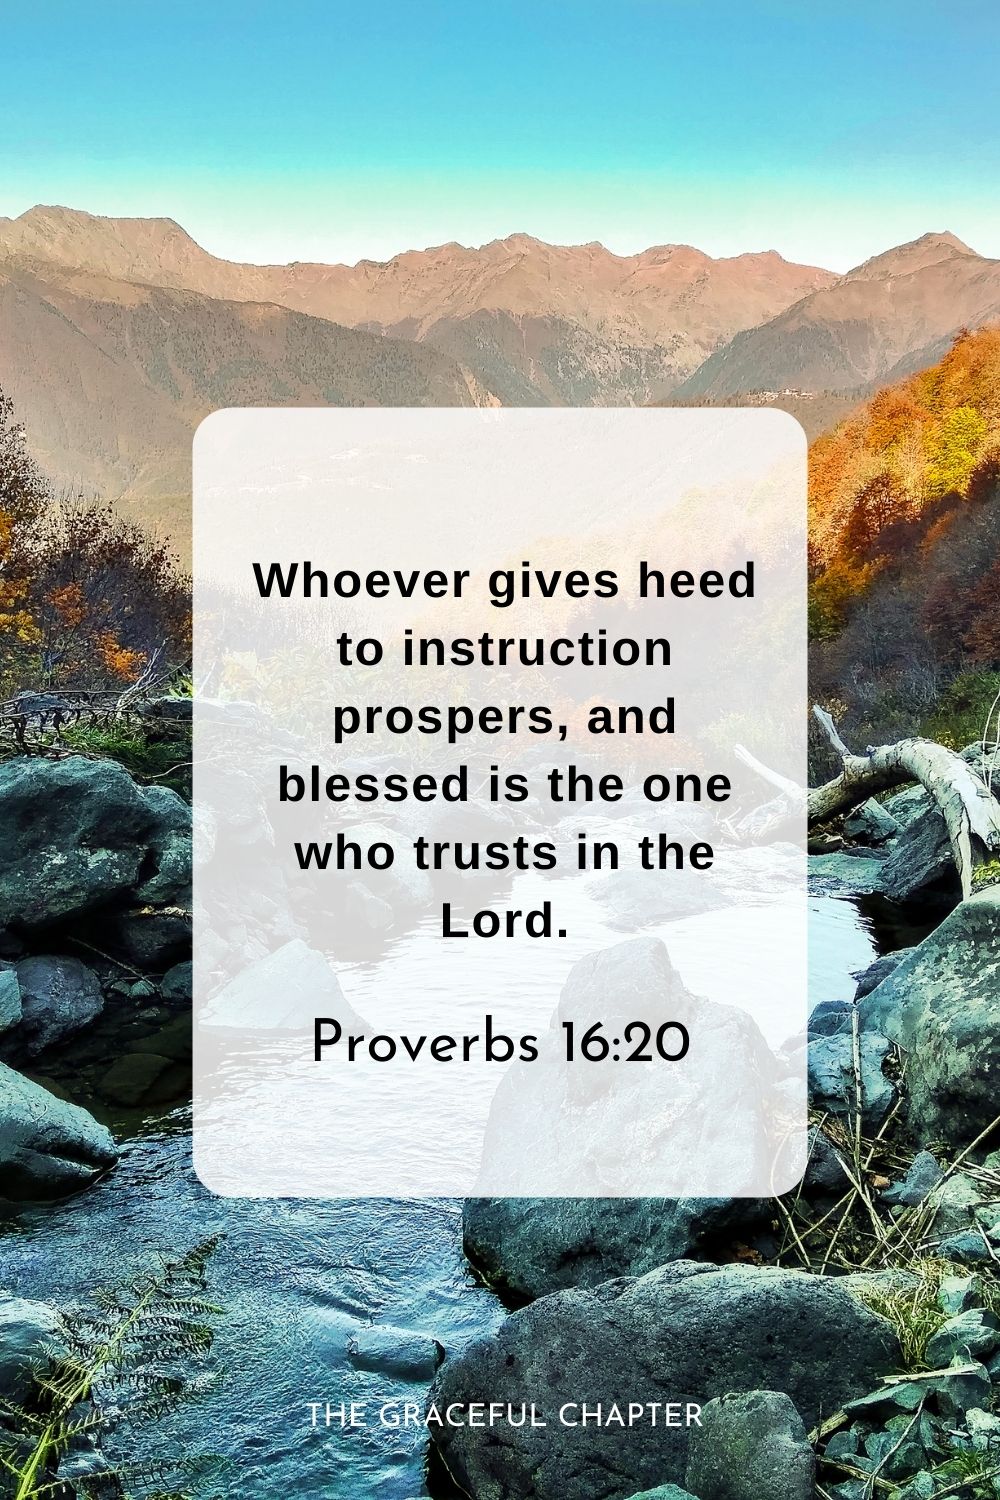 Whoever gives heed to instruction prospers, and blessed is the one who trusts in the Lord.